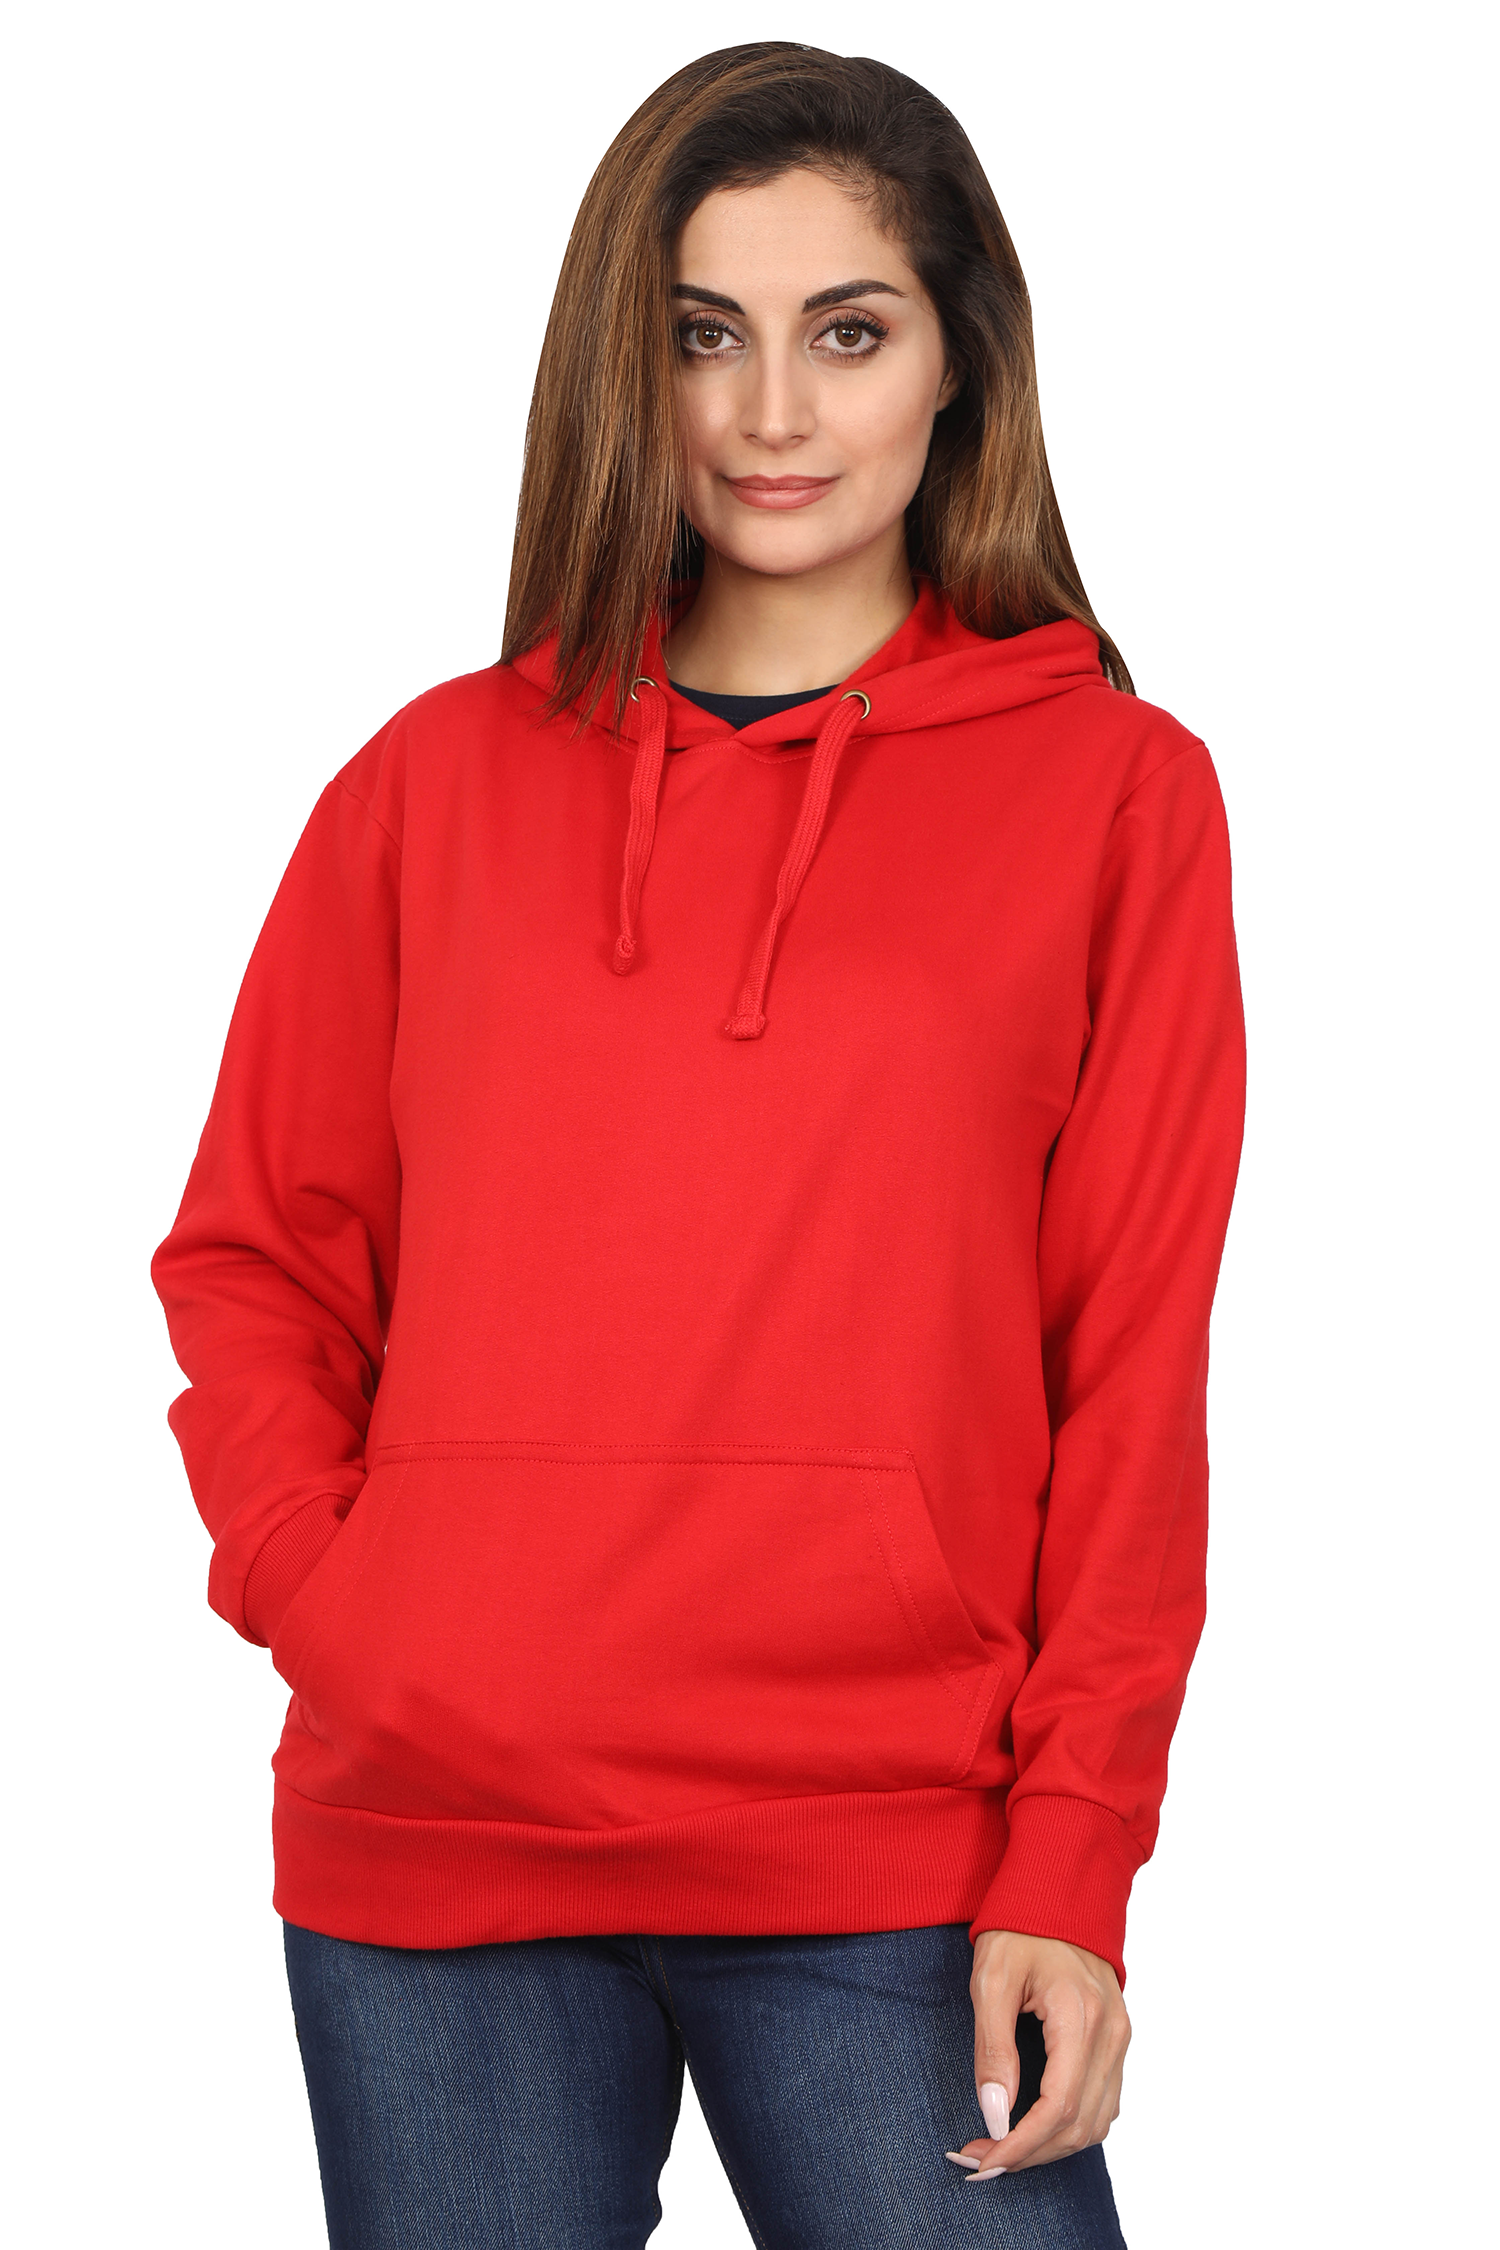 plain red hoodie for women online in India - nautunkee.com